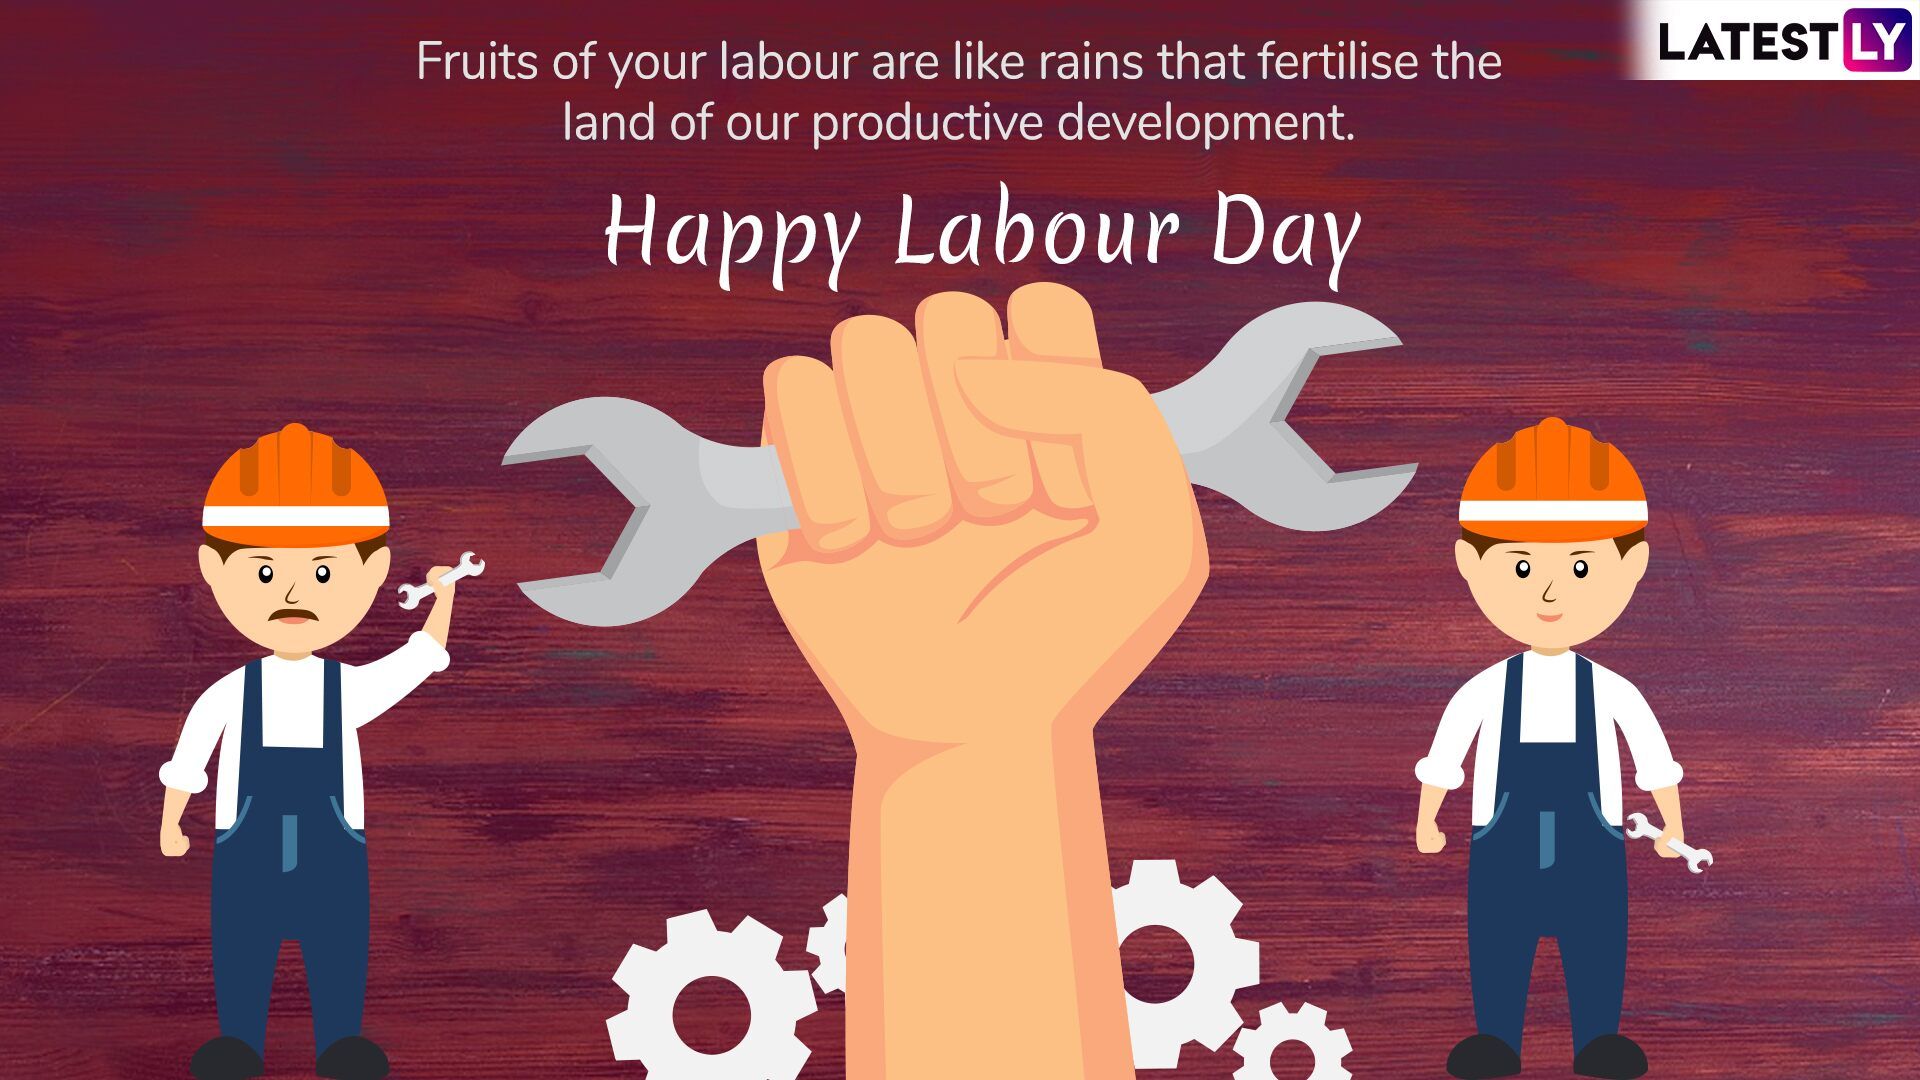 Happy Labour Day 2019 Greetings & Wishes: WhatsApp Stickers, May Day GIF Image & Facebook Messages to Celebrate International Workers' Day